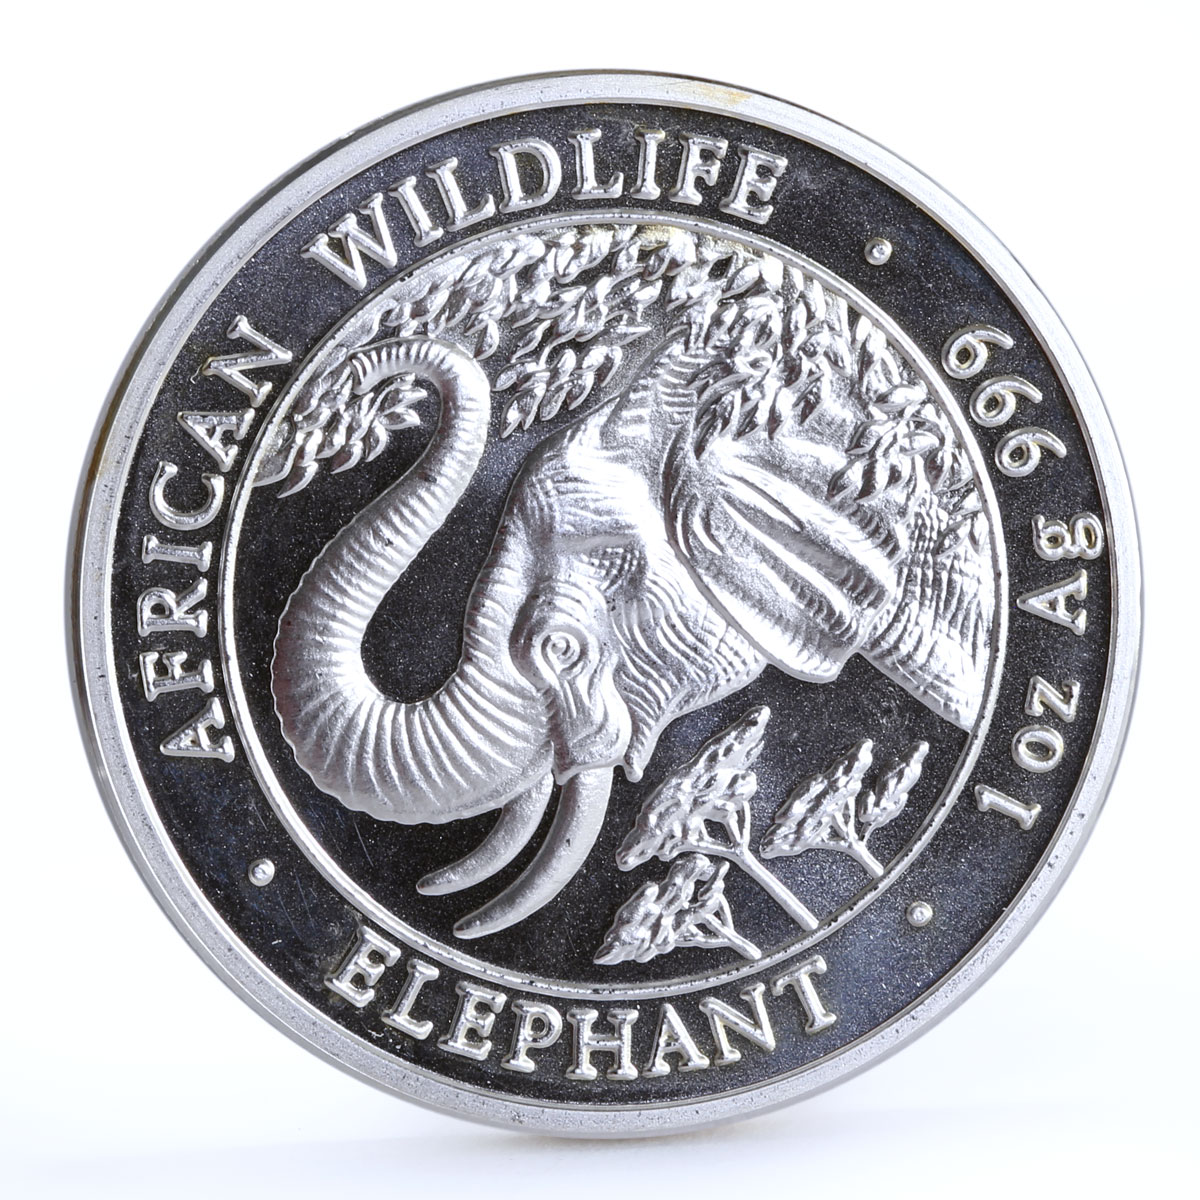 Somali 1000 shillings African Wildlife Elephant Fauna silver coin 2005